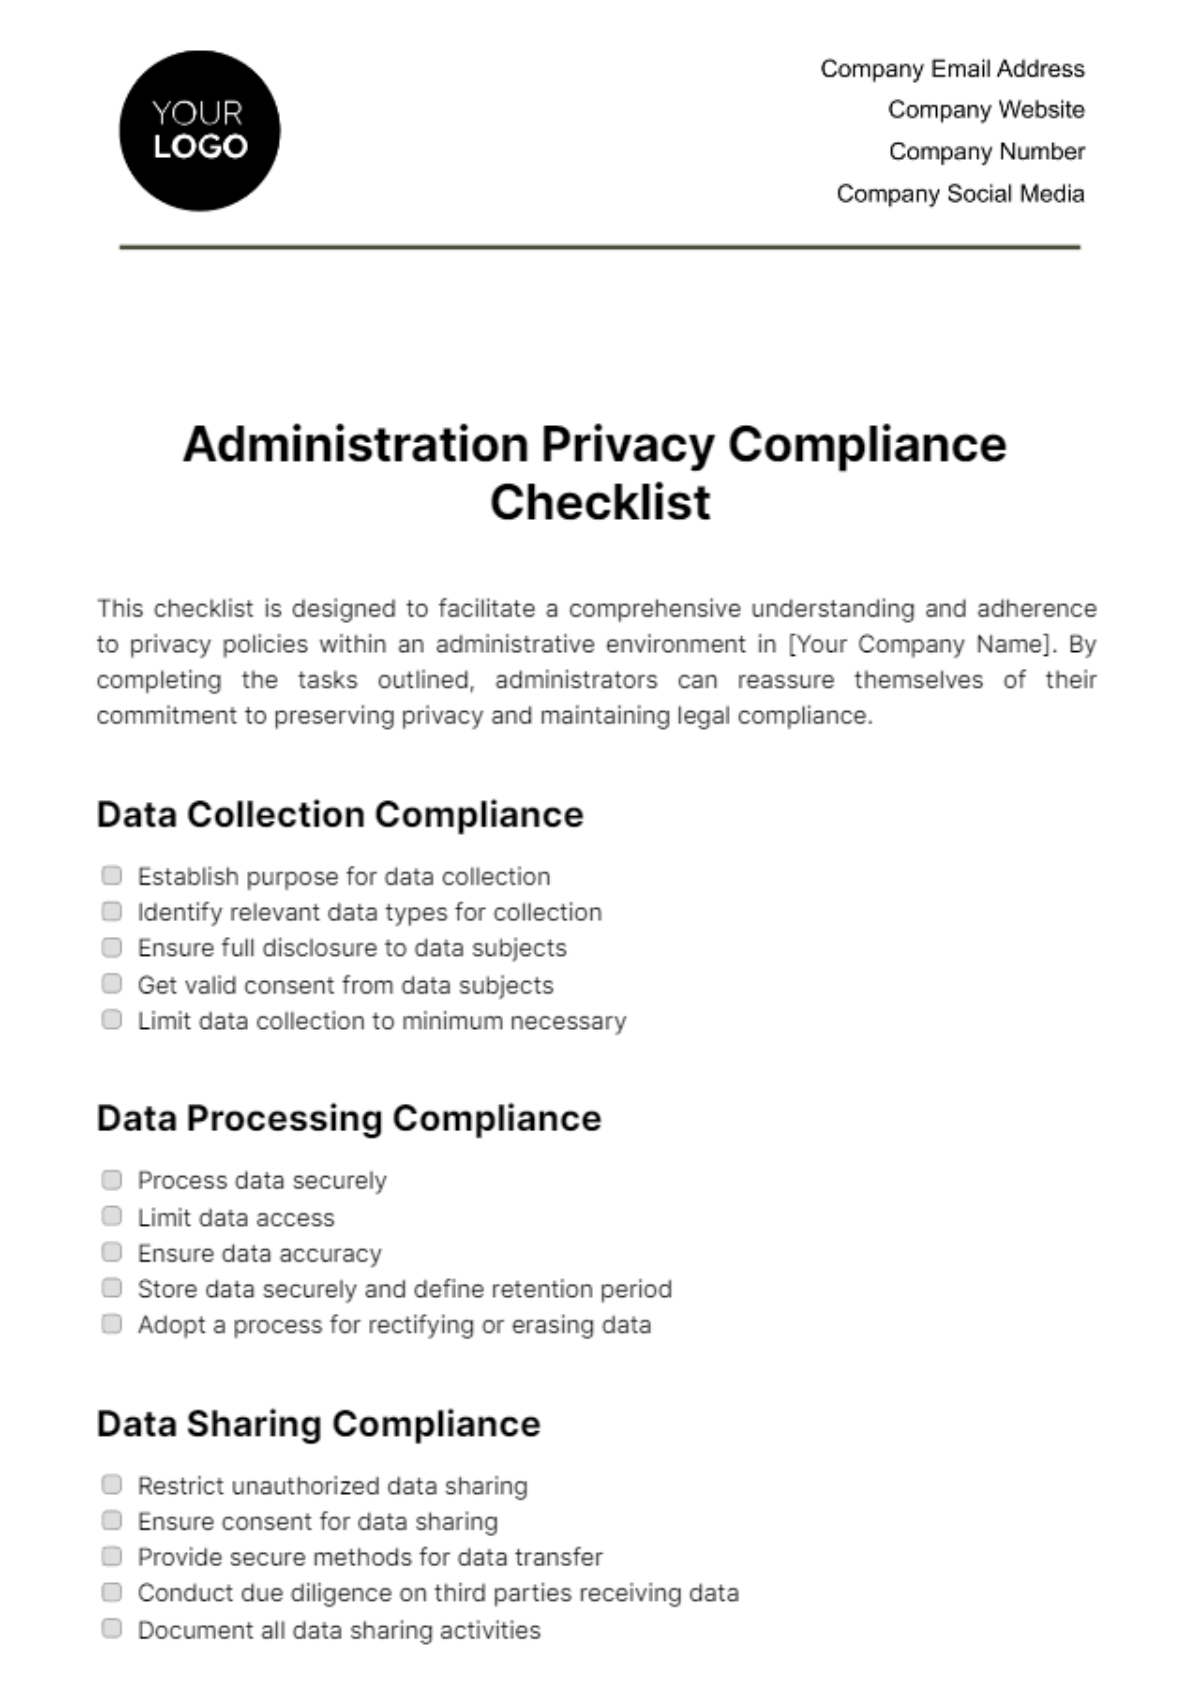 Administration Privacy Compliance Checklist Template